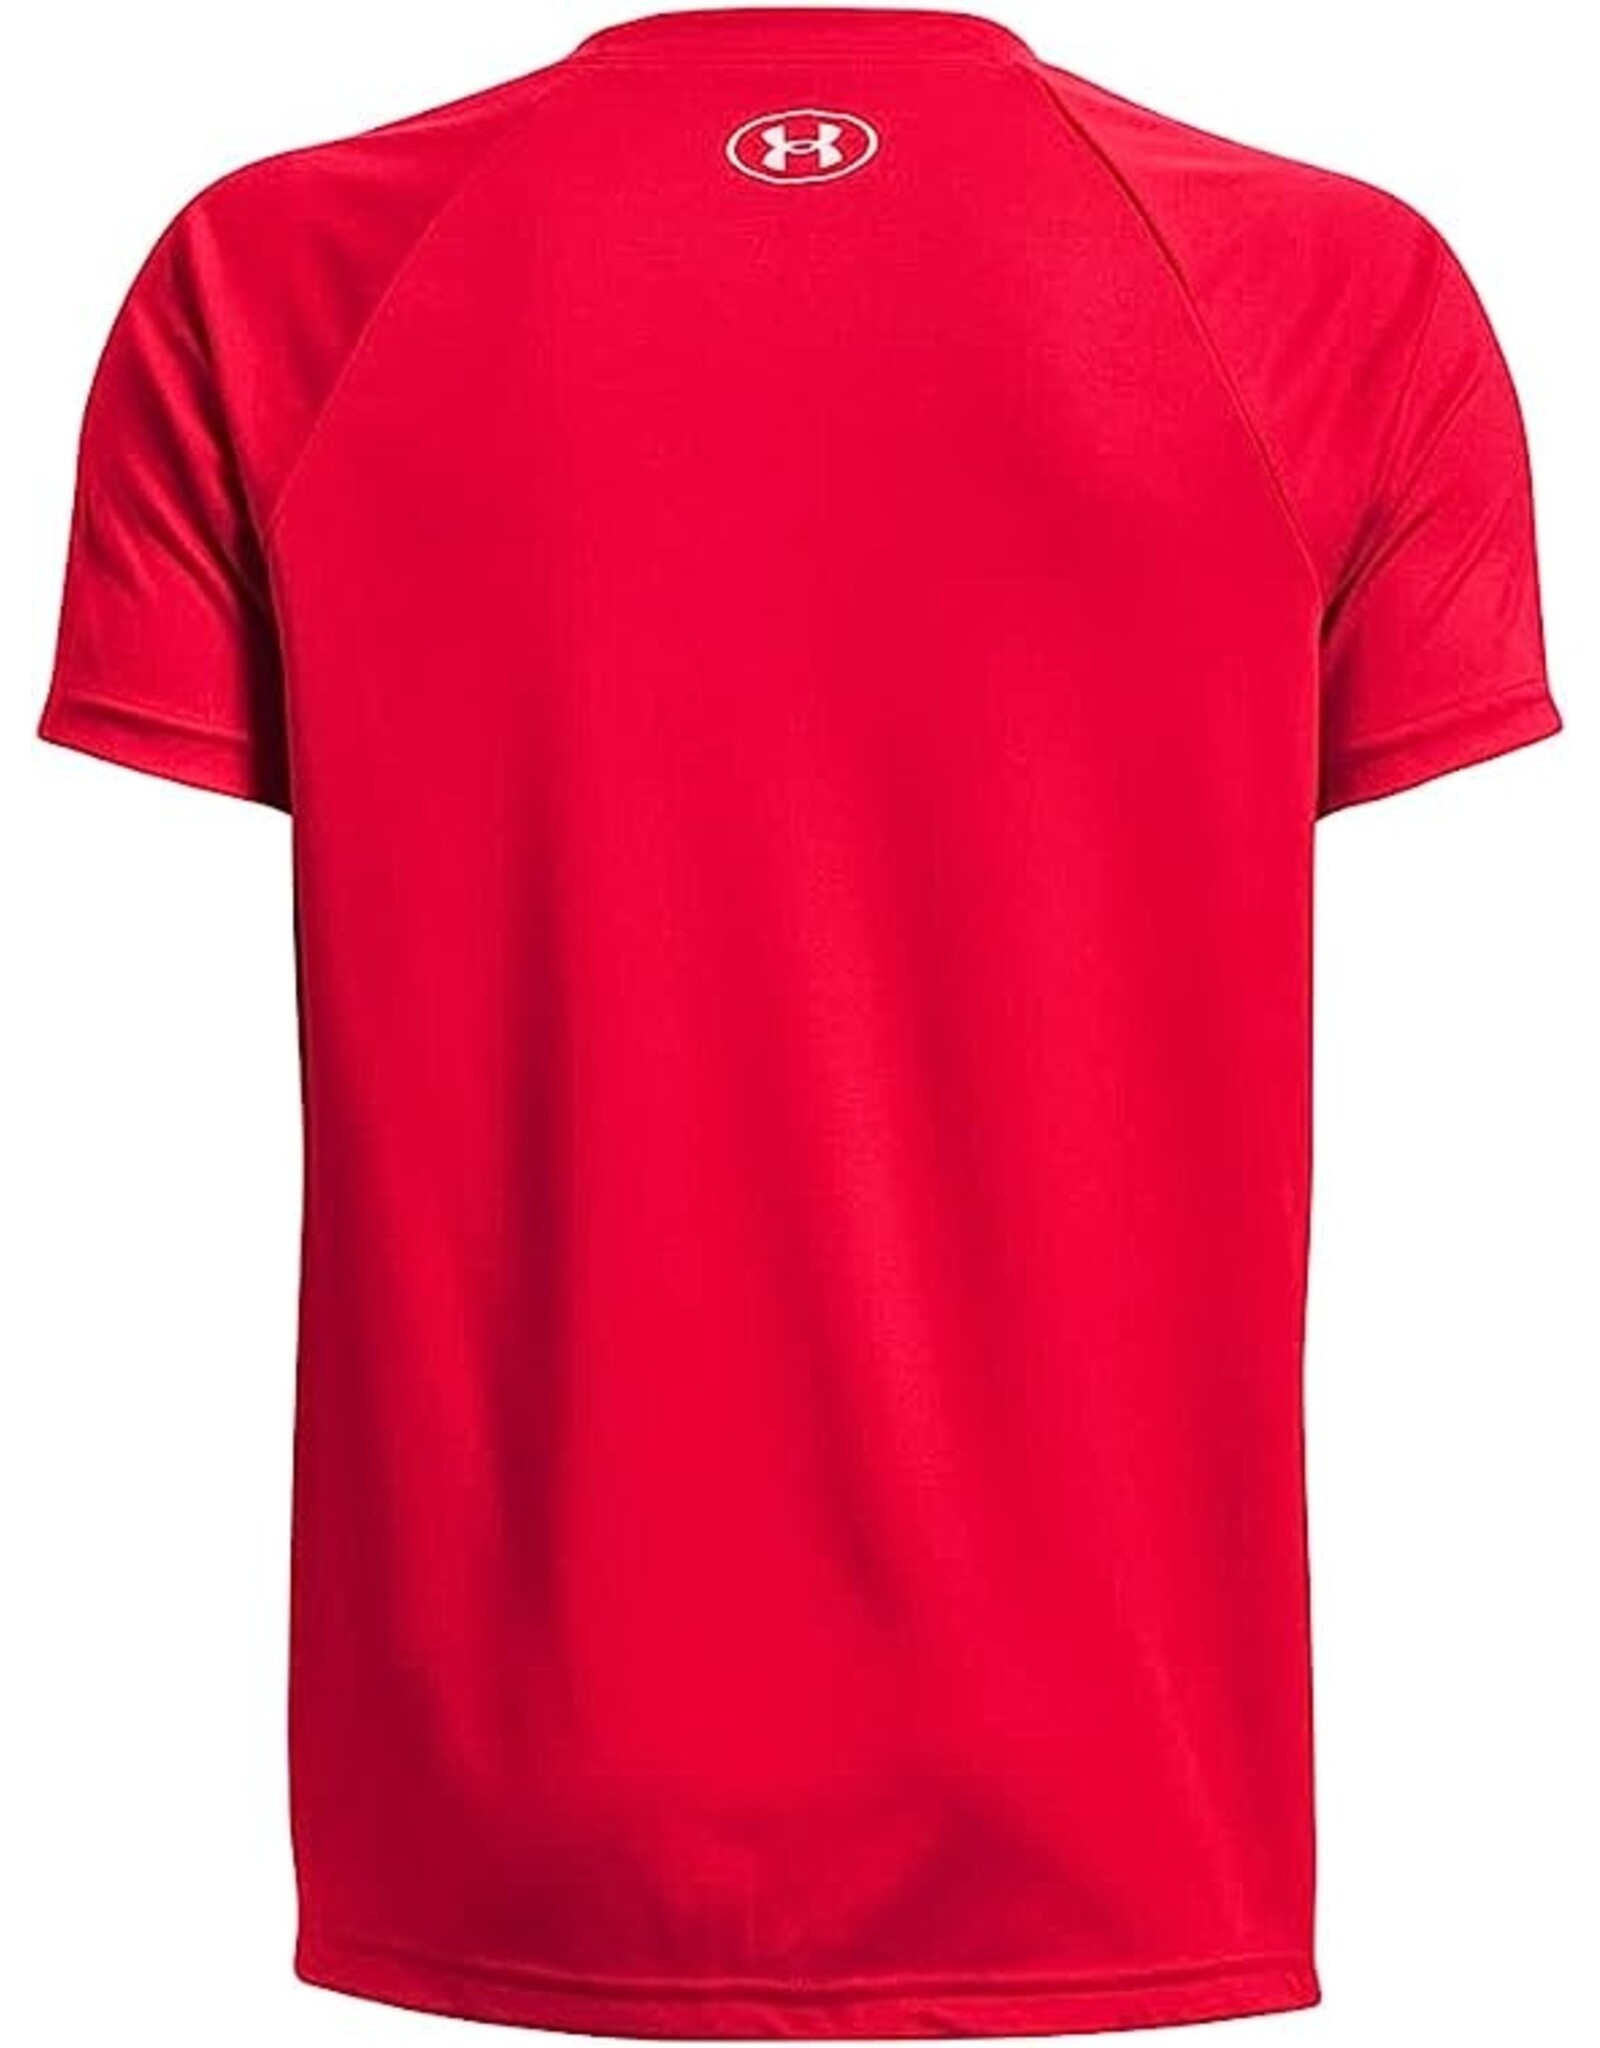 Under Armour Ua Fish Pro Hybrid Woven Printed Short Sleeve in